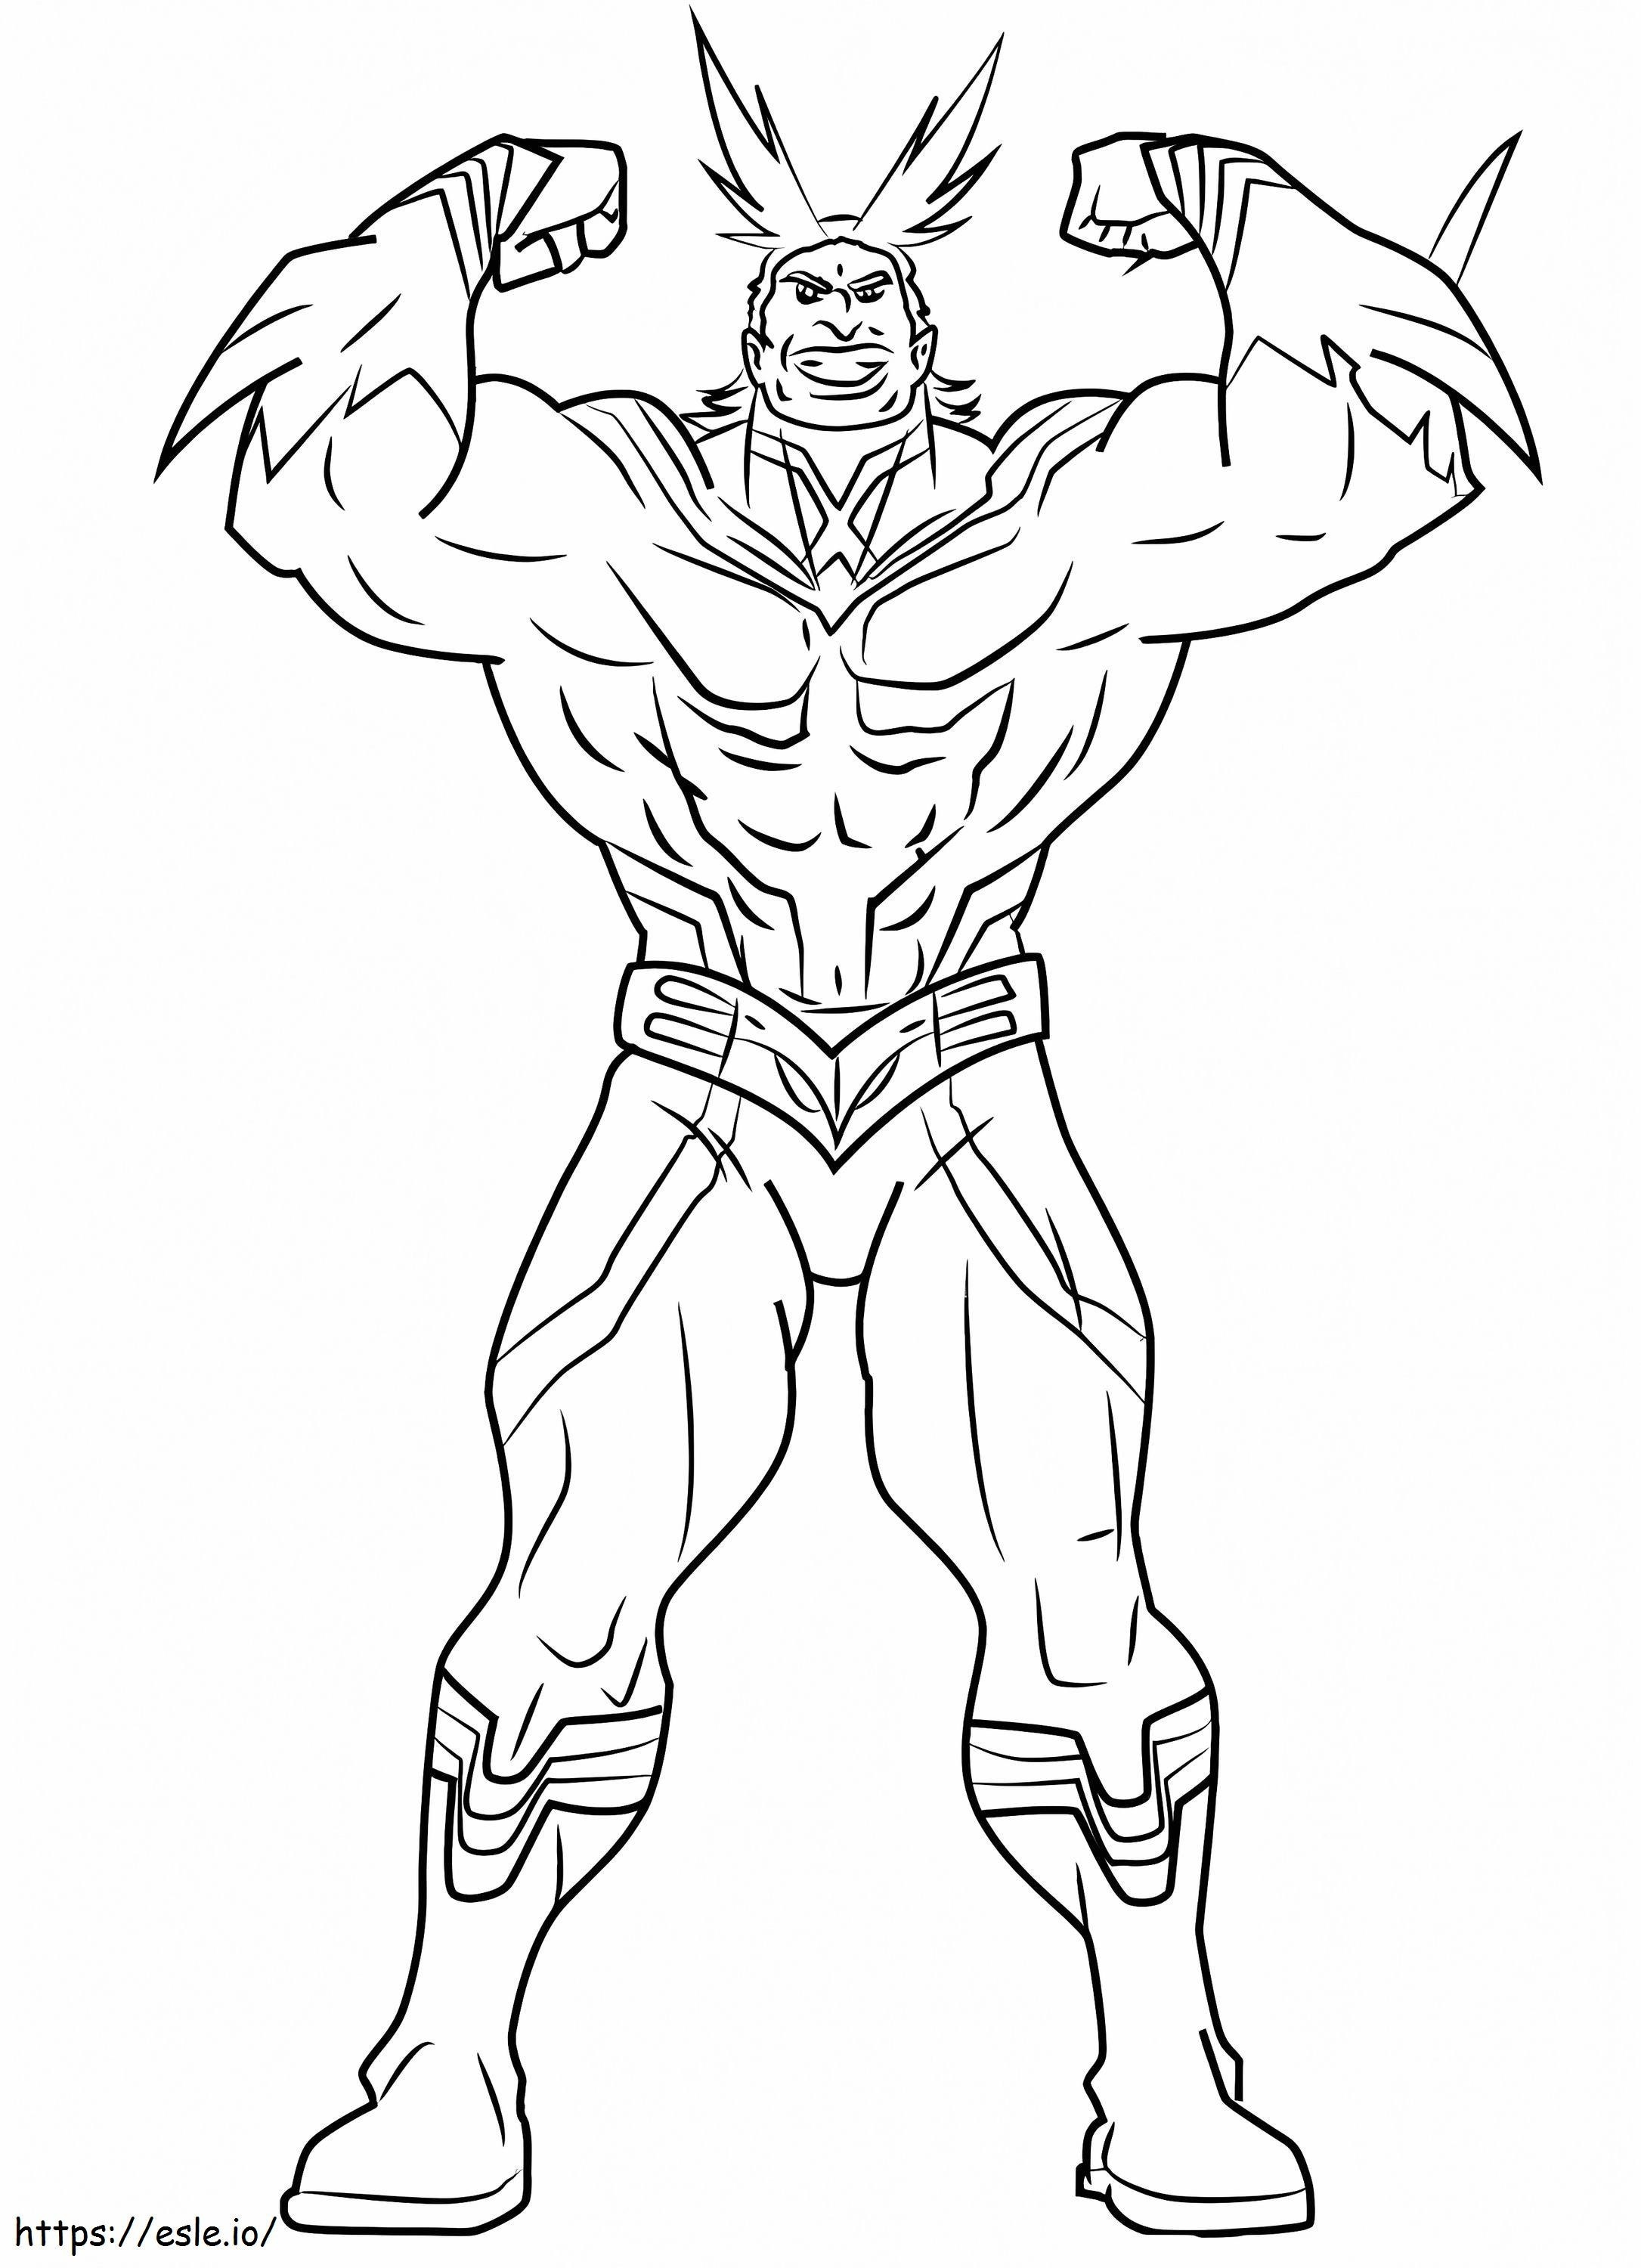 Power Of All Power coloring page